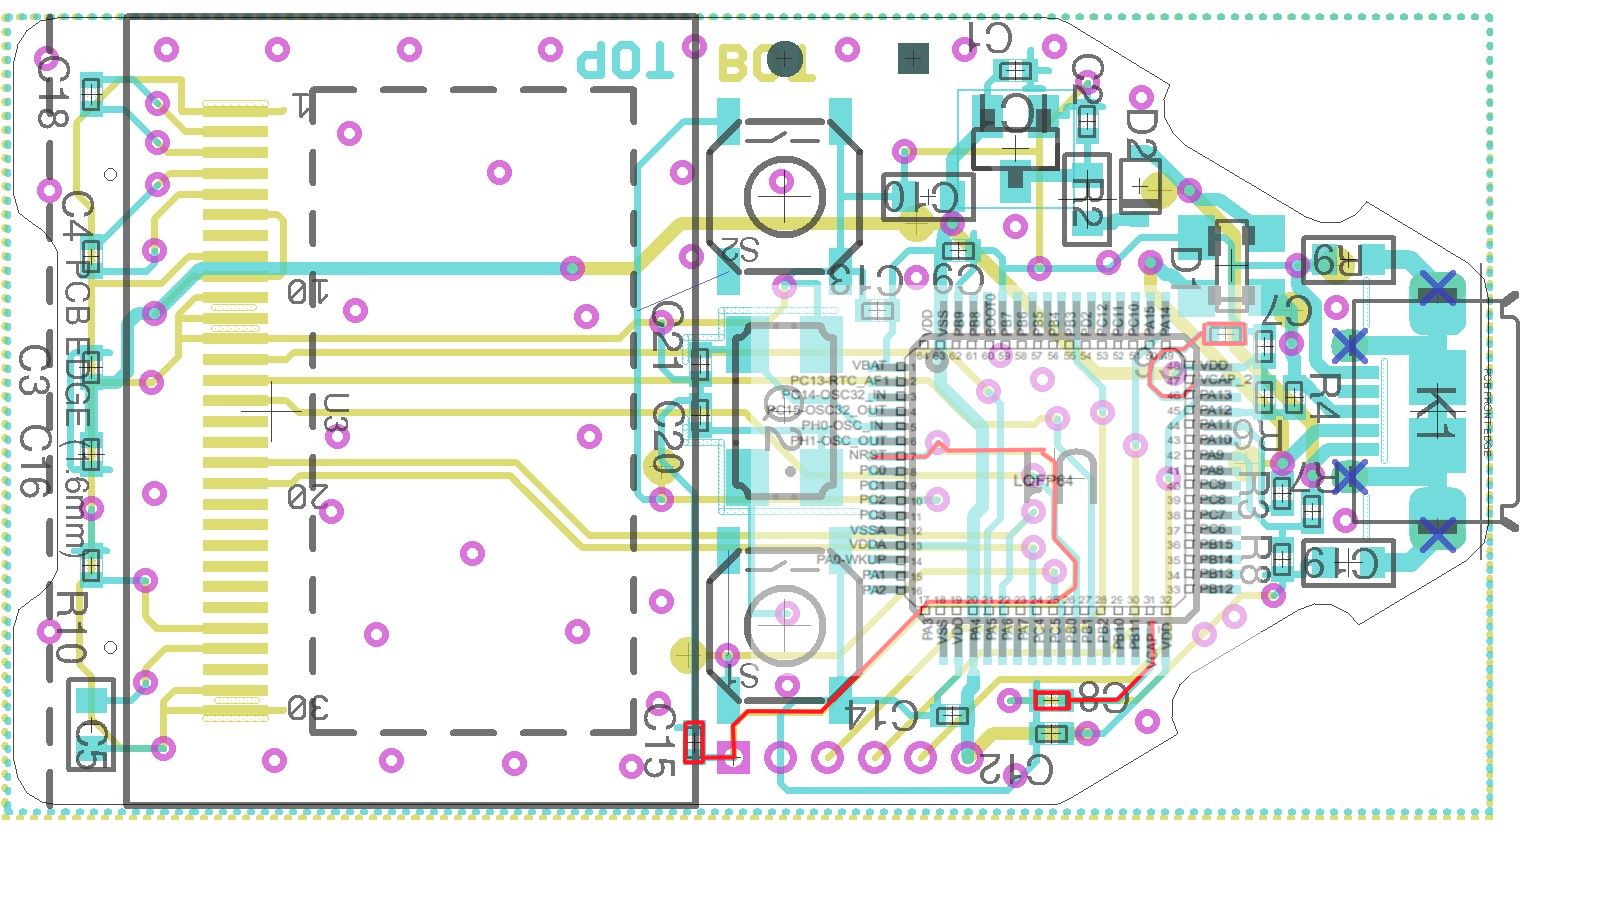 Schematic with capacitors removed